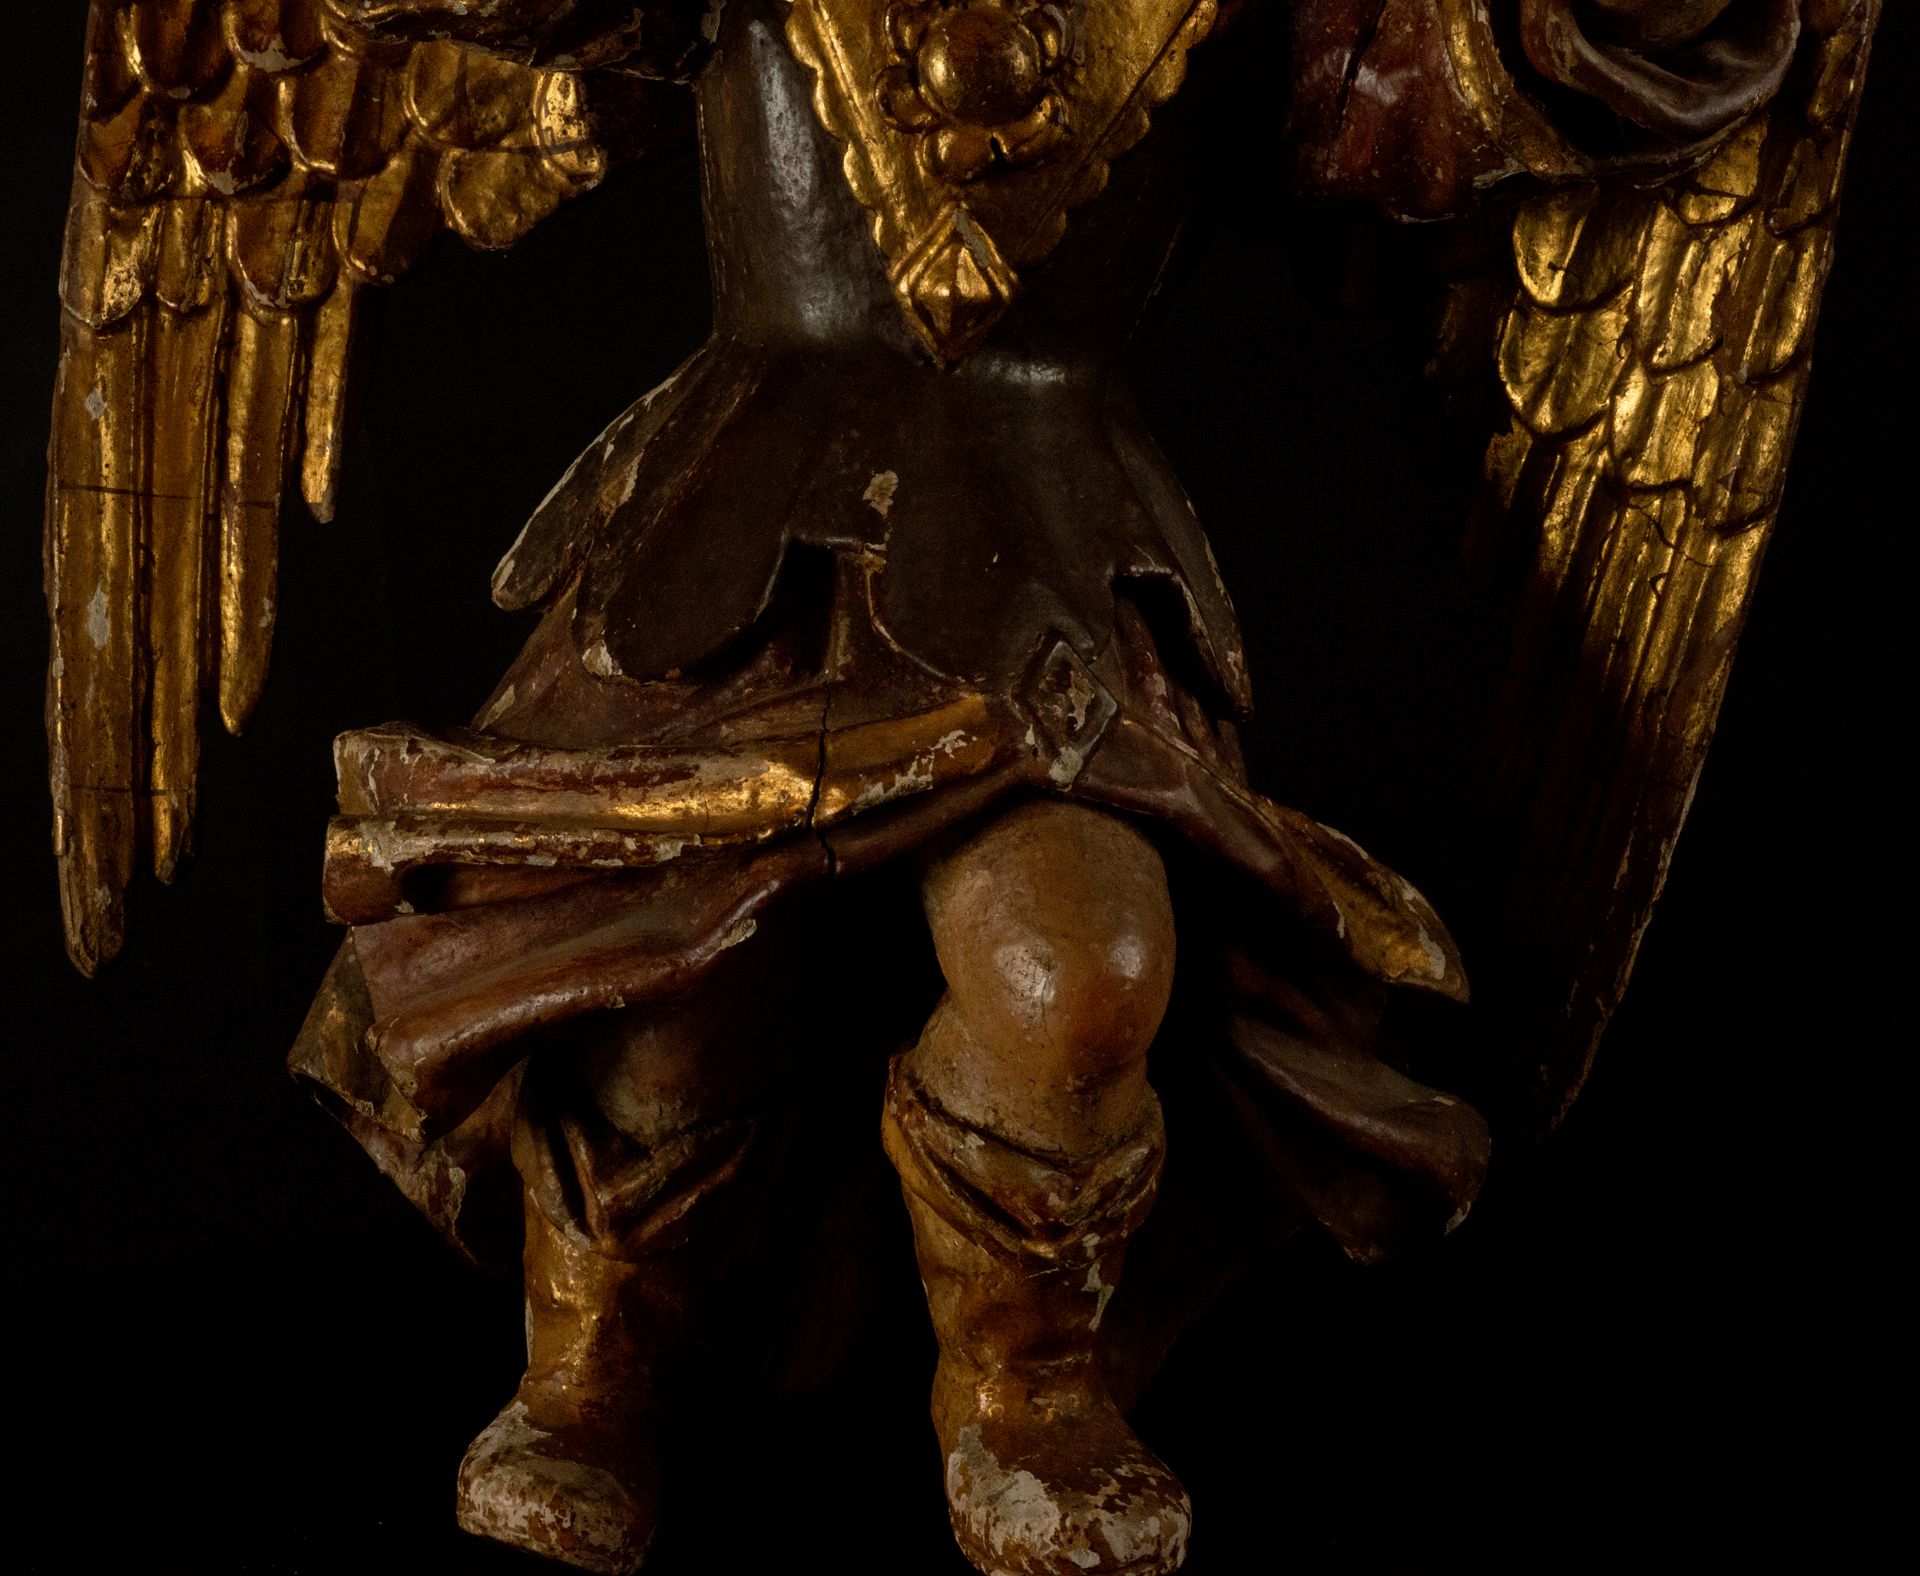 Angel in Carved and polychrome Wood, Portuguese colonial work, Goa, 17th century - Image 3 of 4